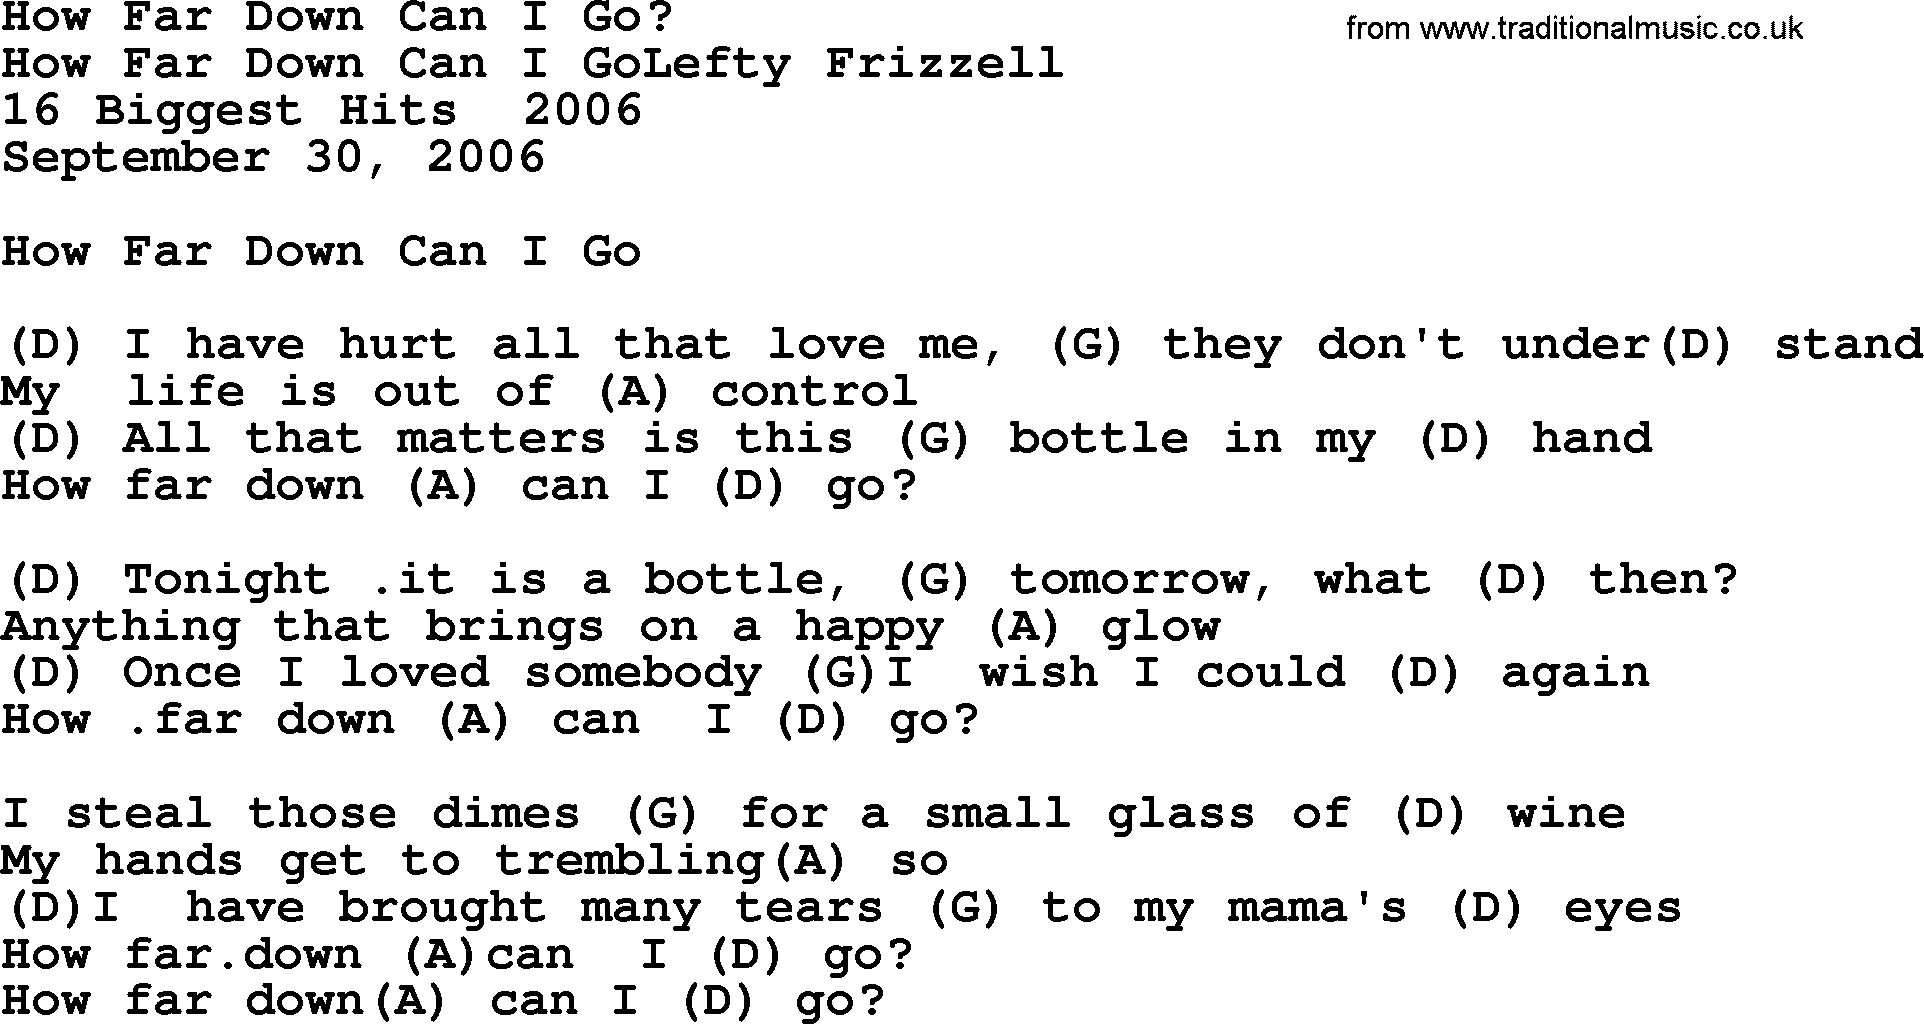 Bluegrass song: How Far Down Can I Go, lyrics and chords